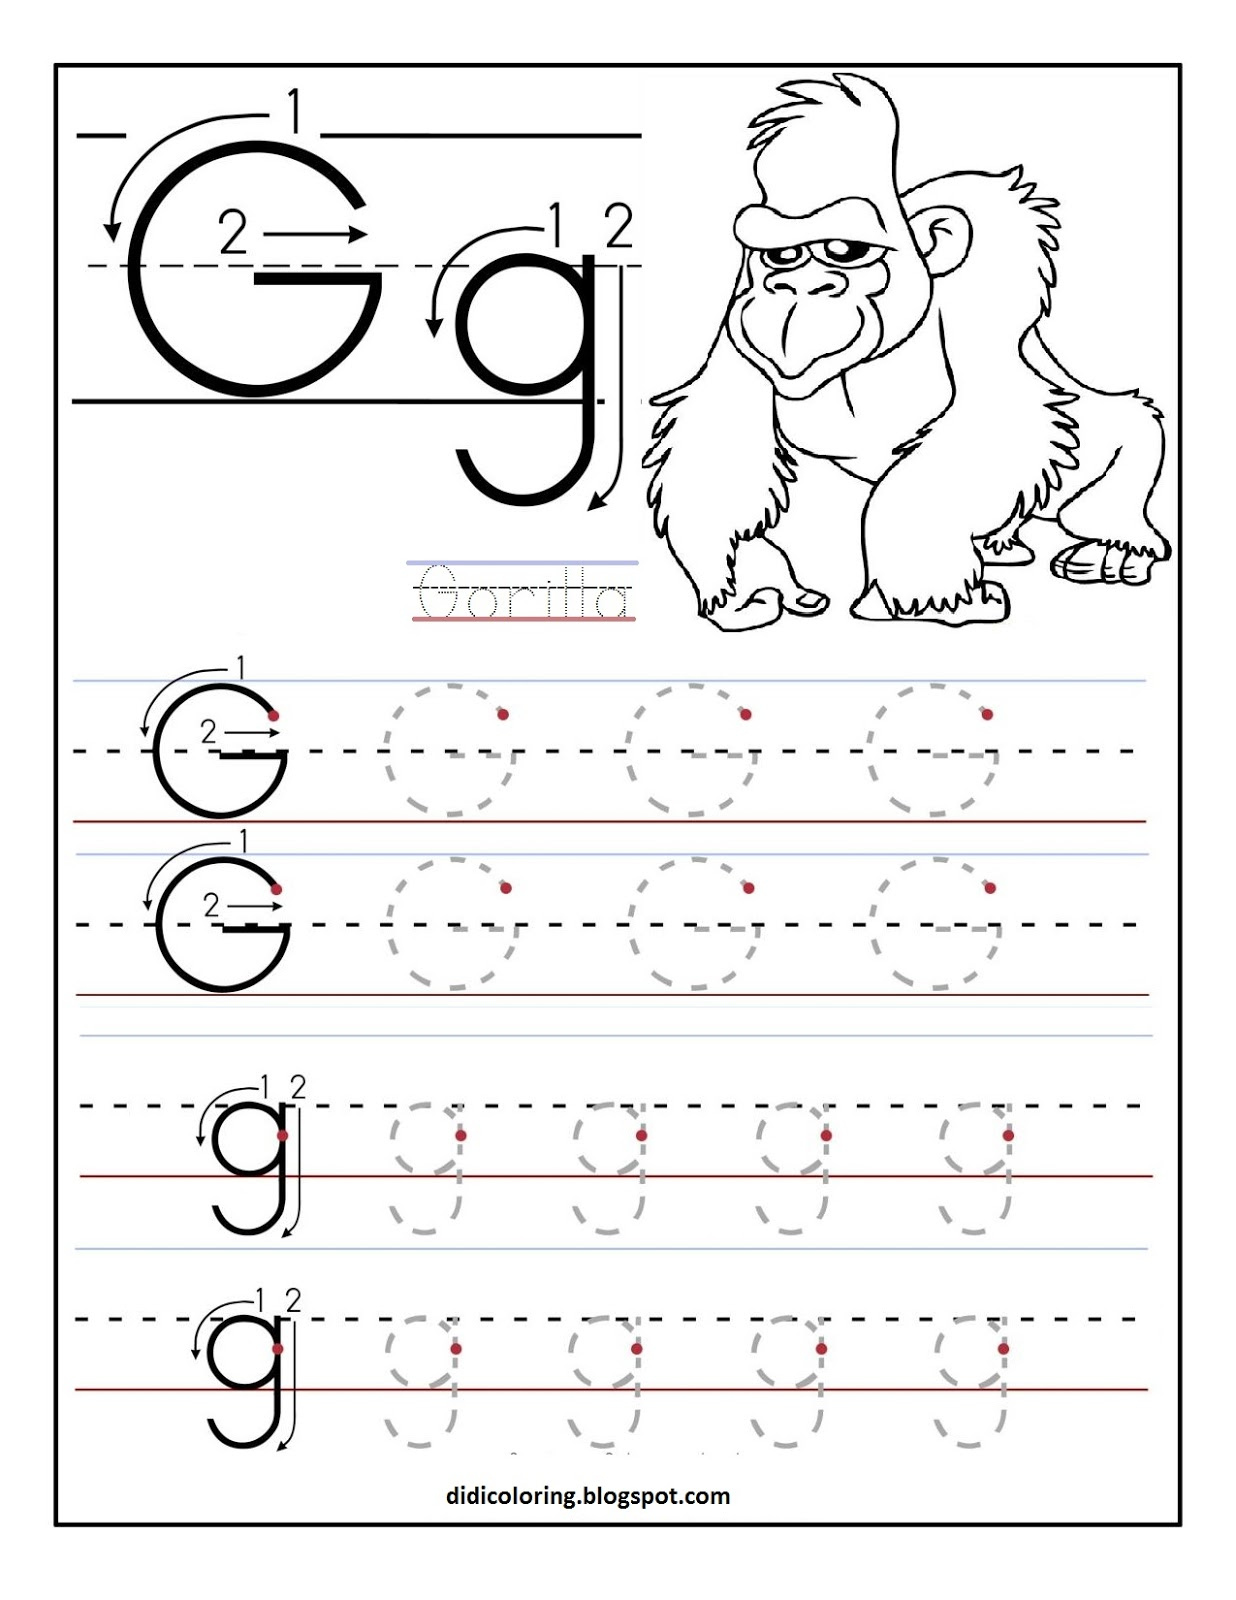 Free Printable Worksheet Letter G For Your Child To Learn And Write 